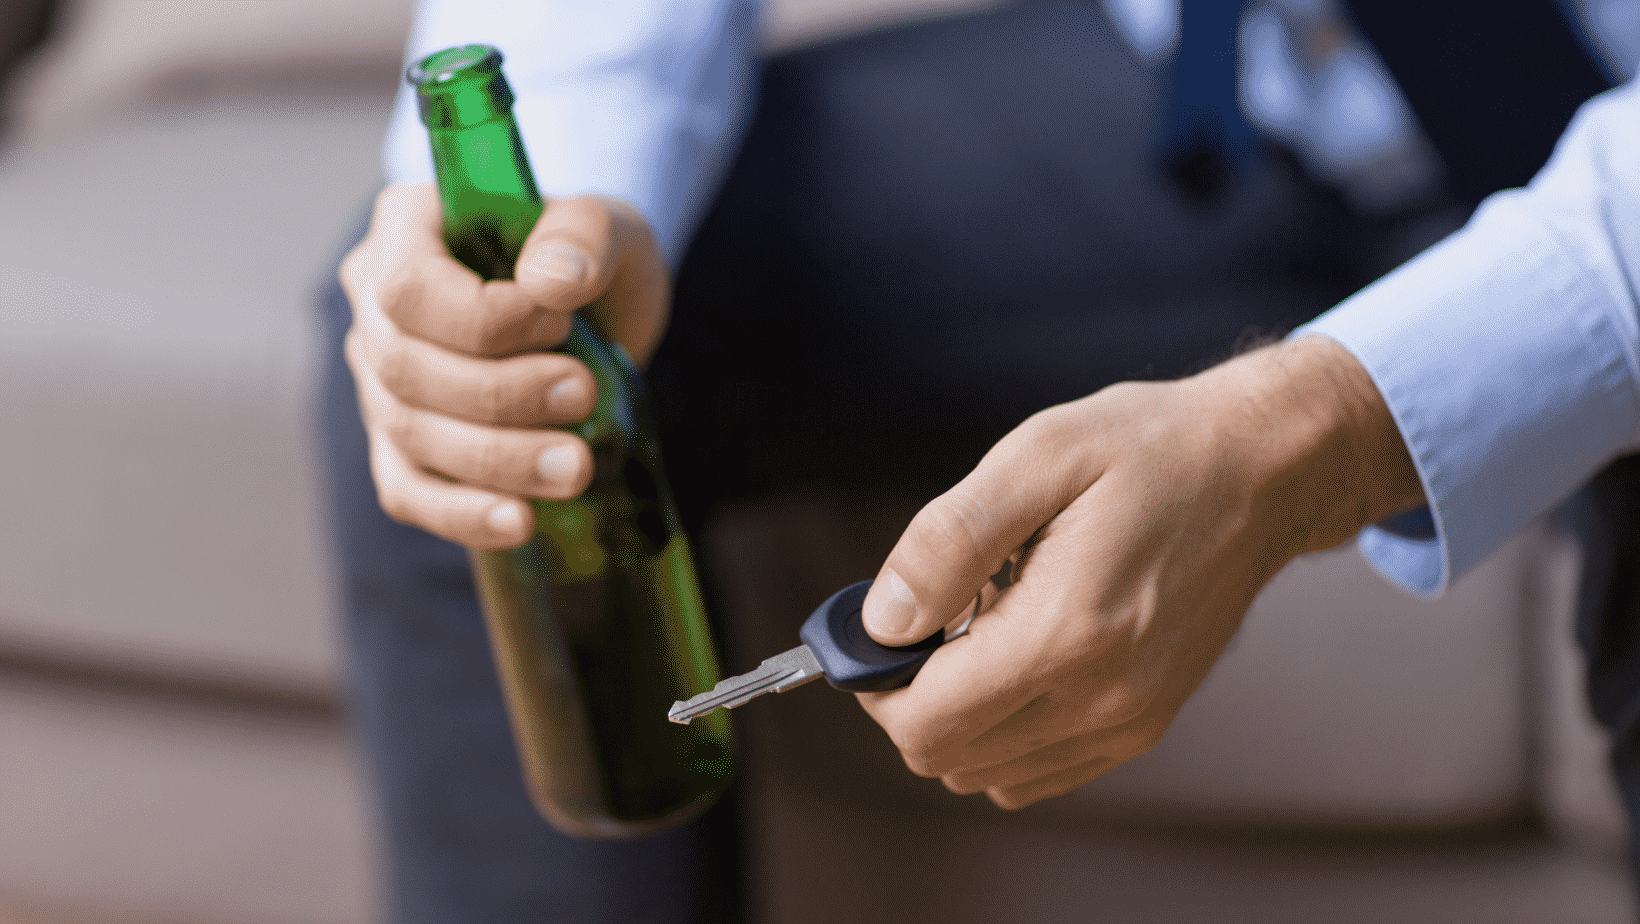 man holding alcohol while holding a car key